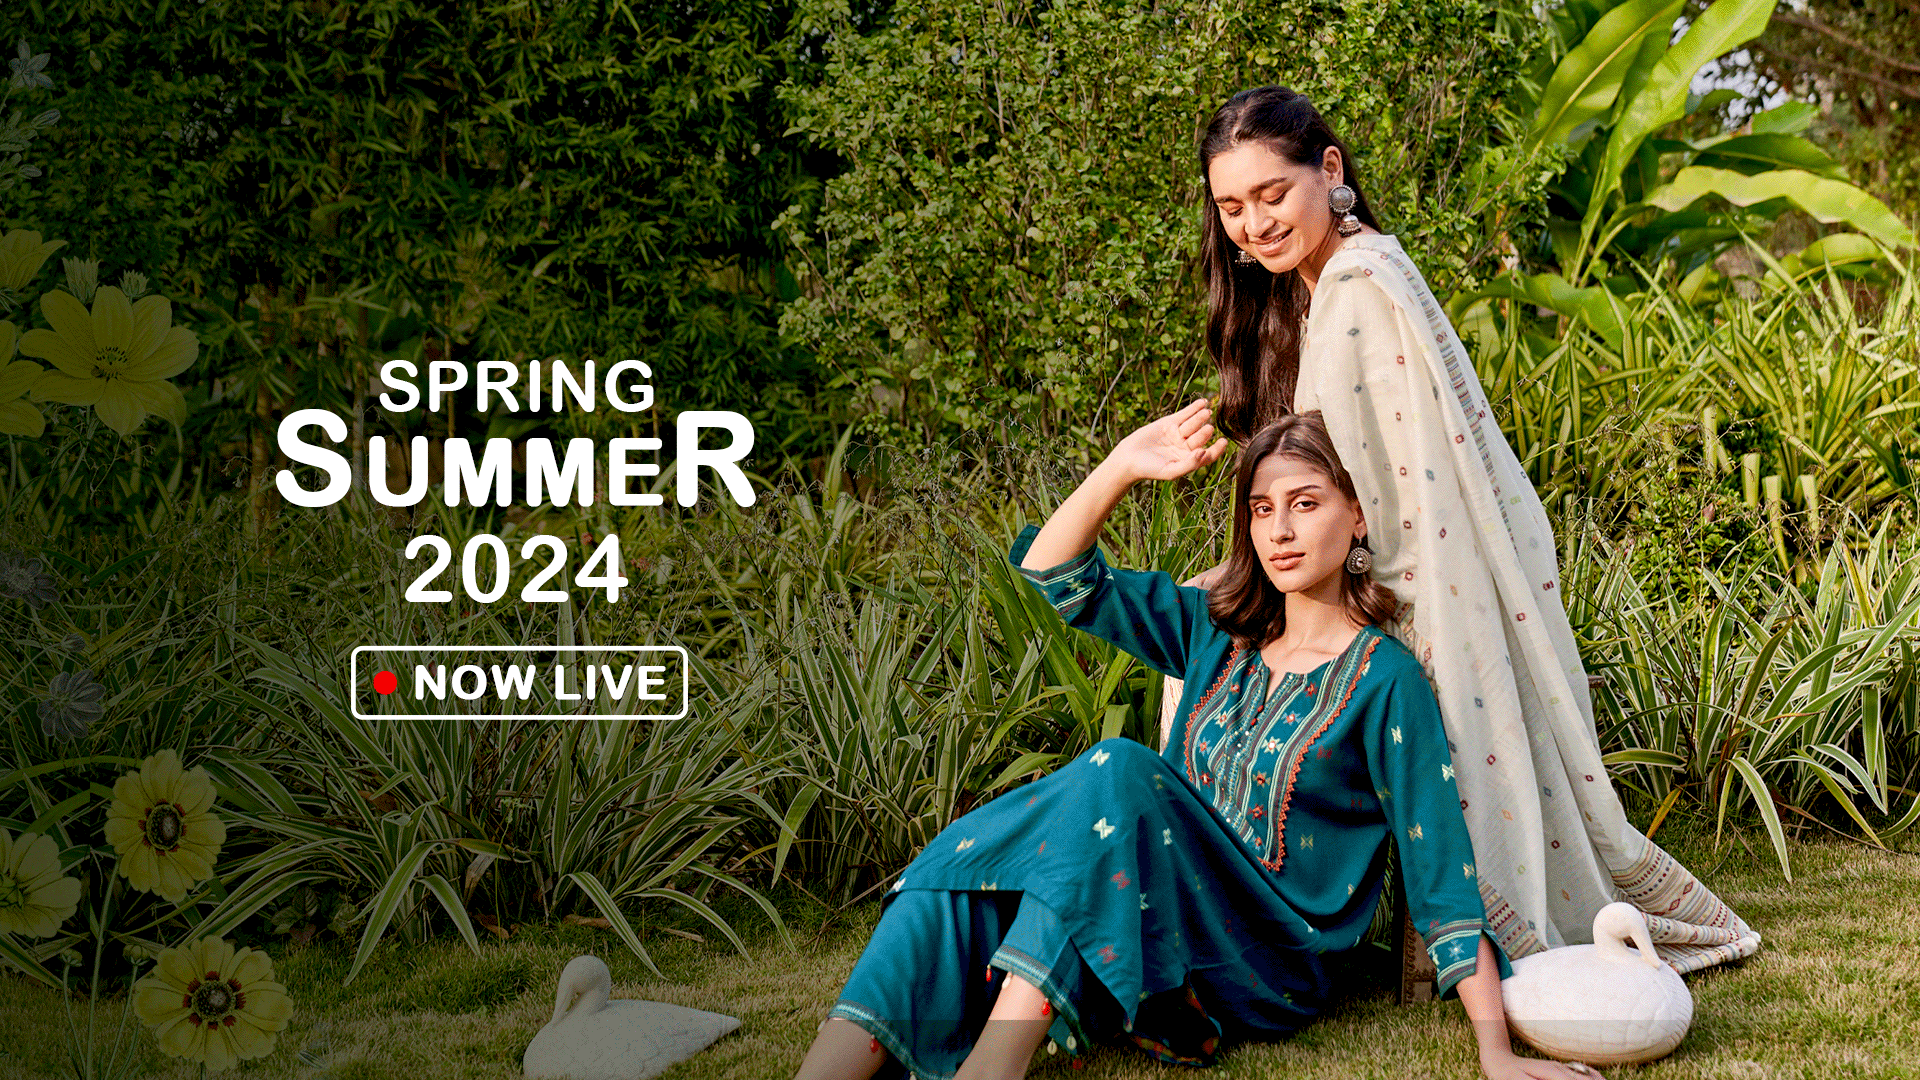 Spring Summer 2024 Live Now